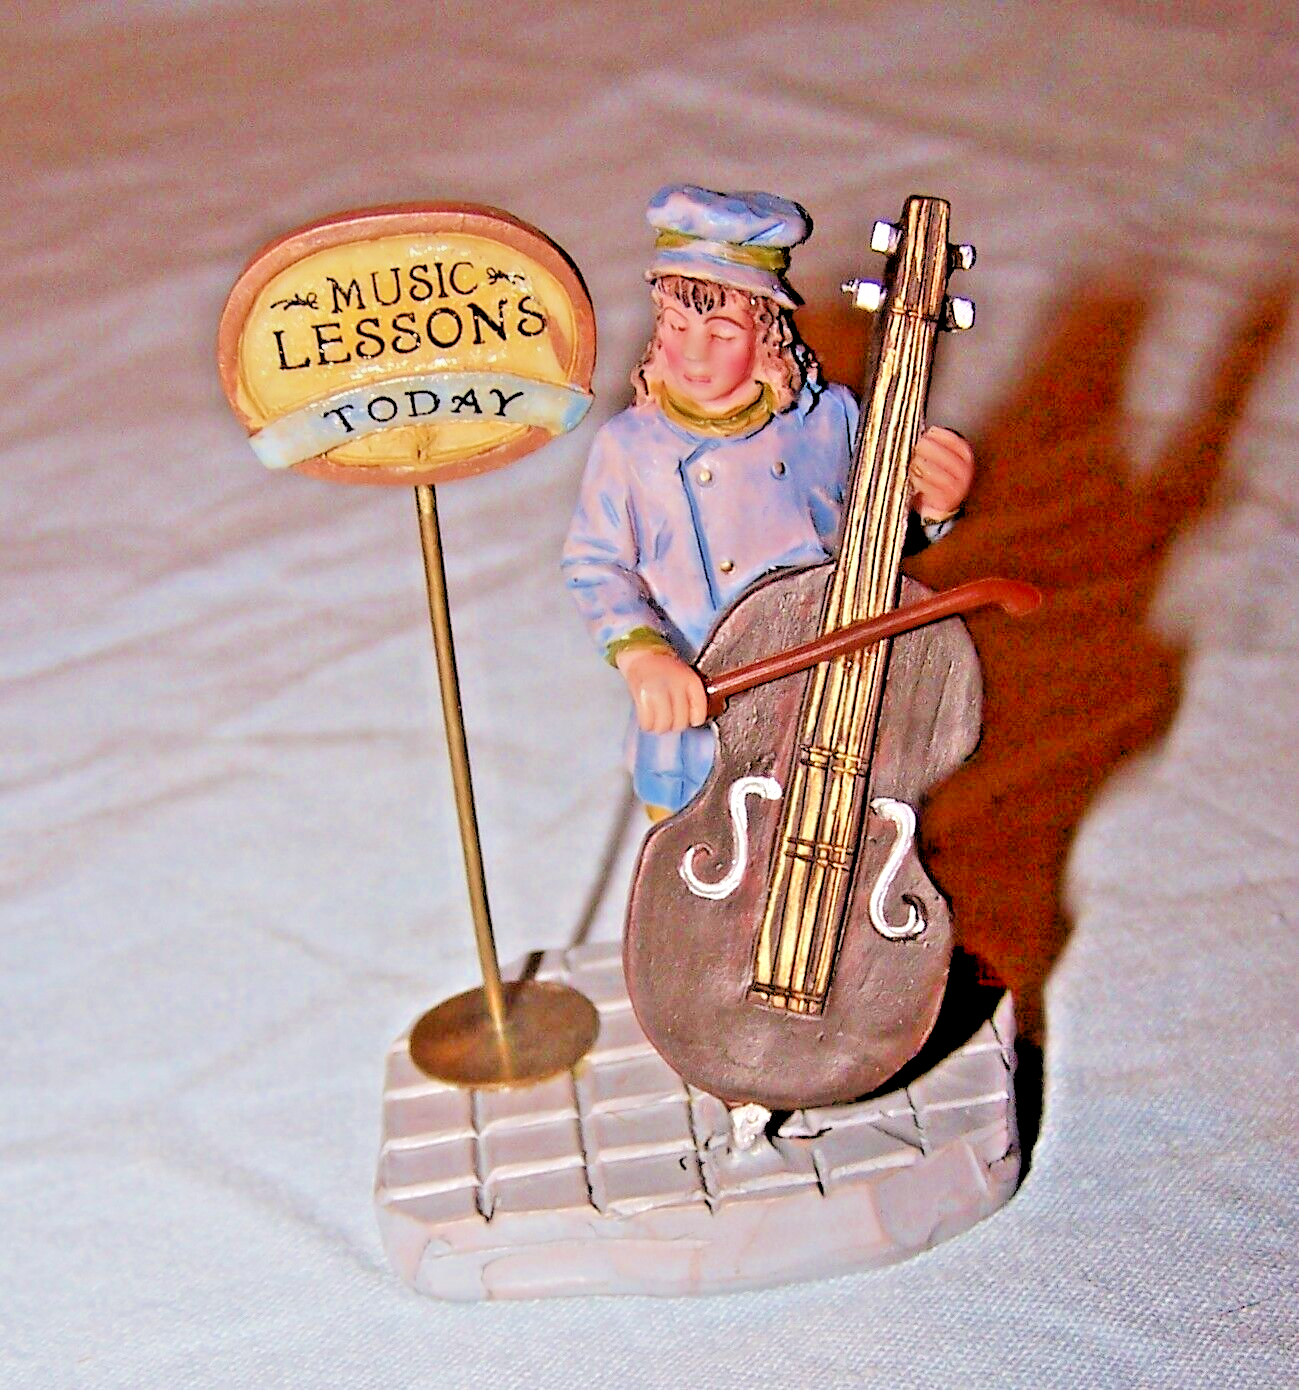 Loose Lemax-Music Lesson Sign w/Musician-Lot 4 - $9.50